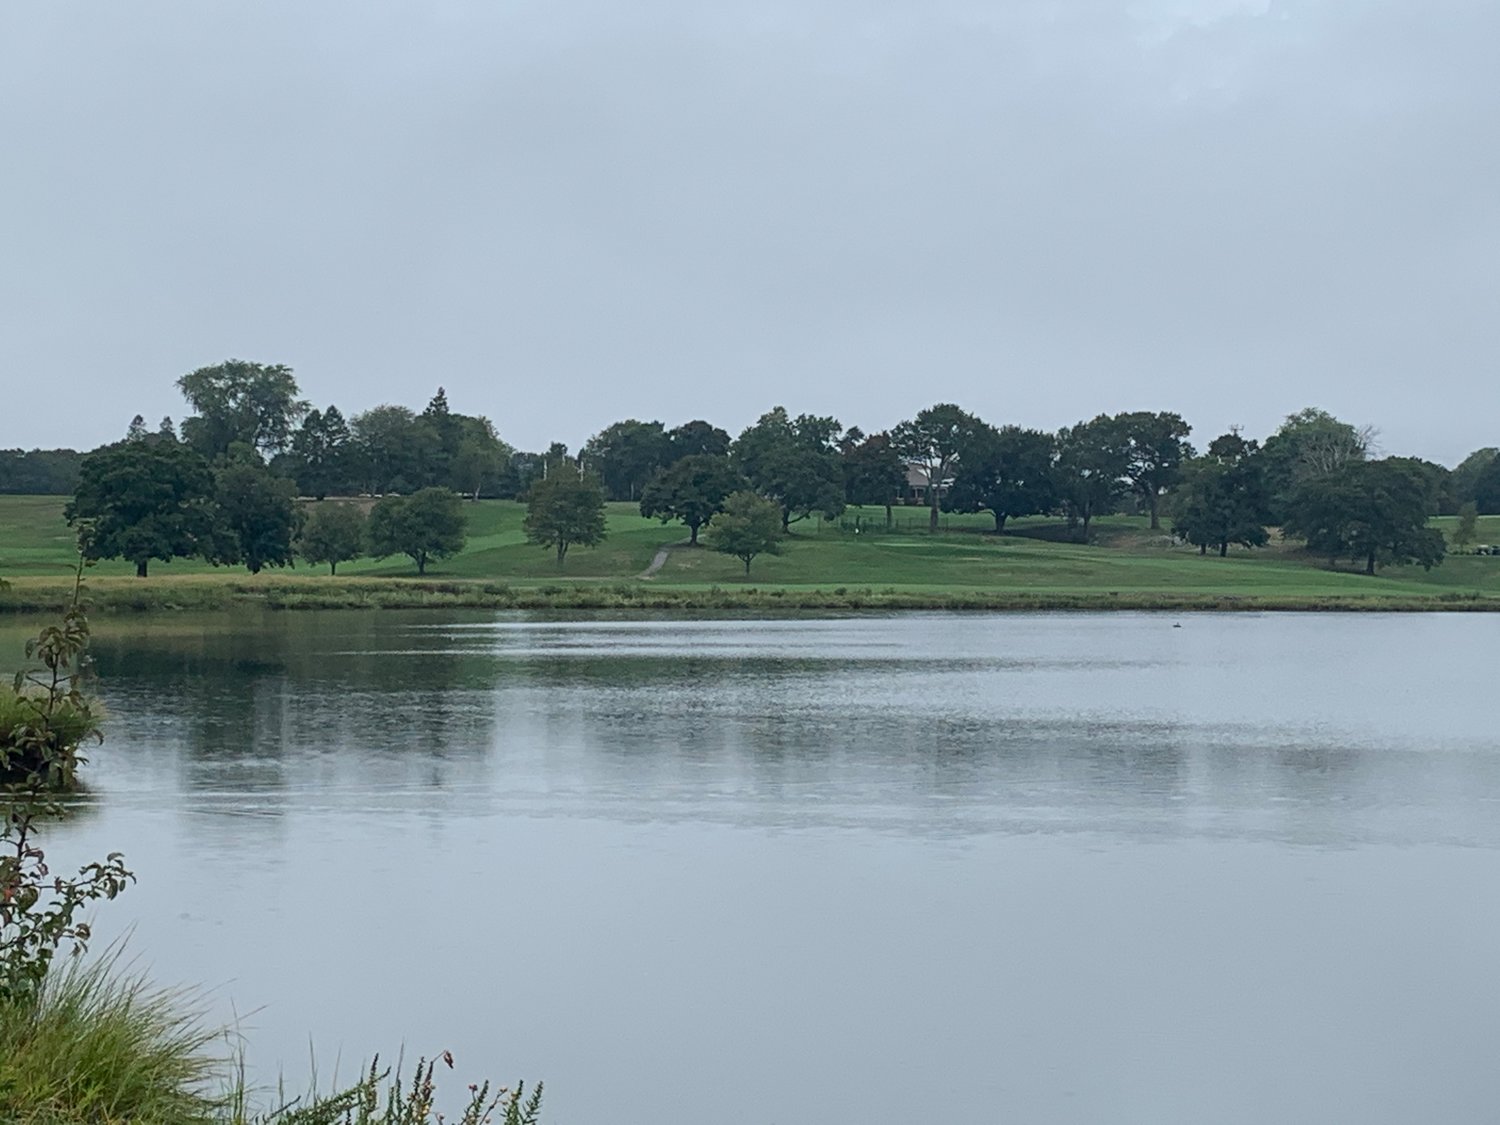 A view of the Metacomet Golf Club from the Watchemoket Cove off Veterans Memorial Parkway.